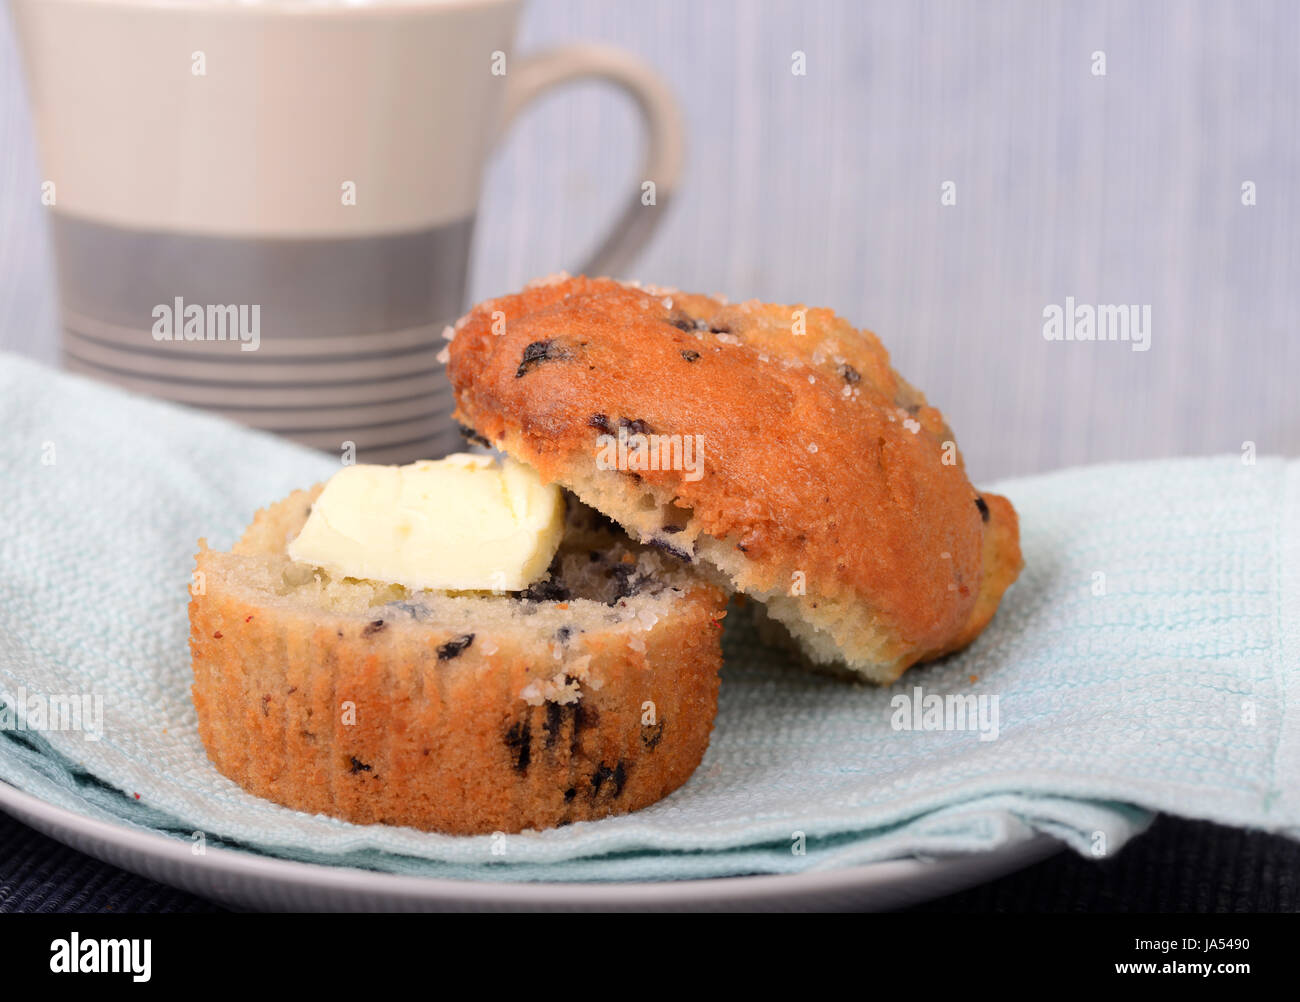 Delicious warm blueberry muffin served with butter and a cup of coffee Stock Photo